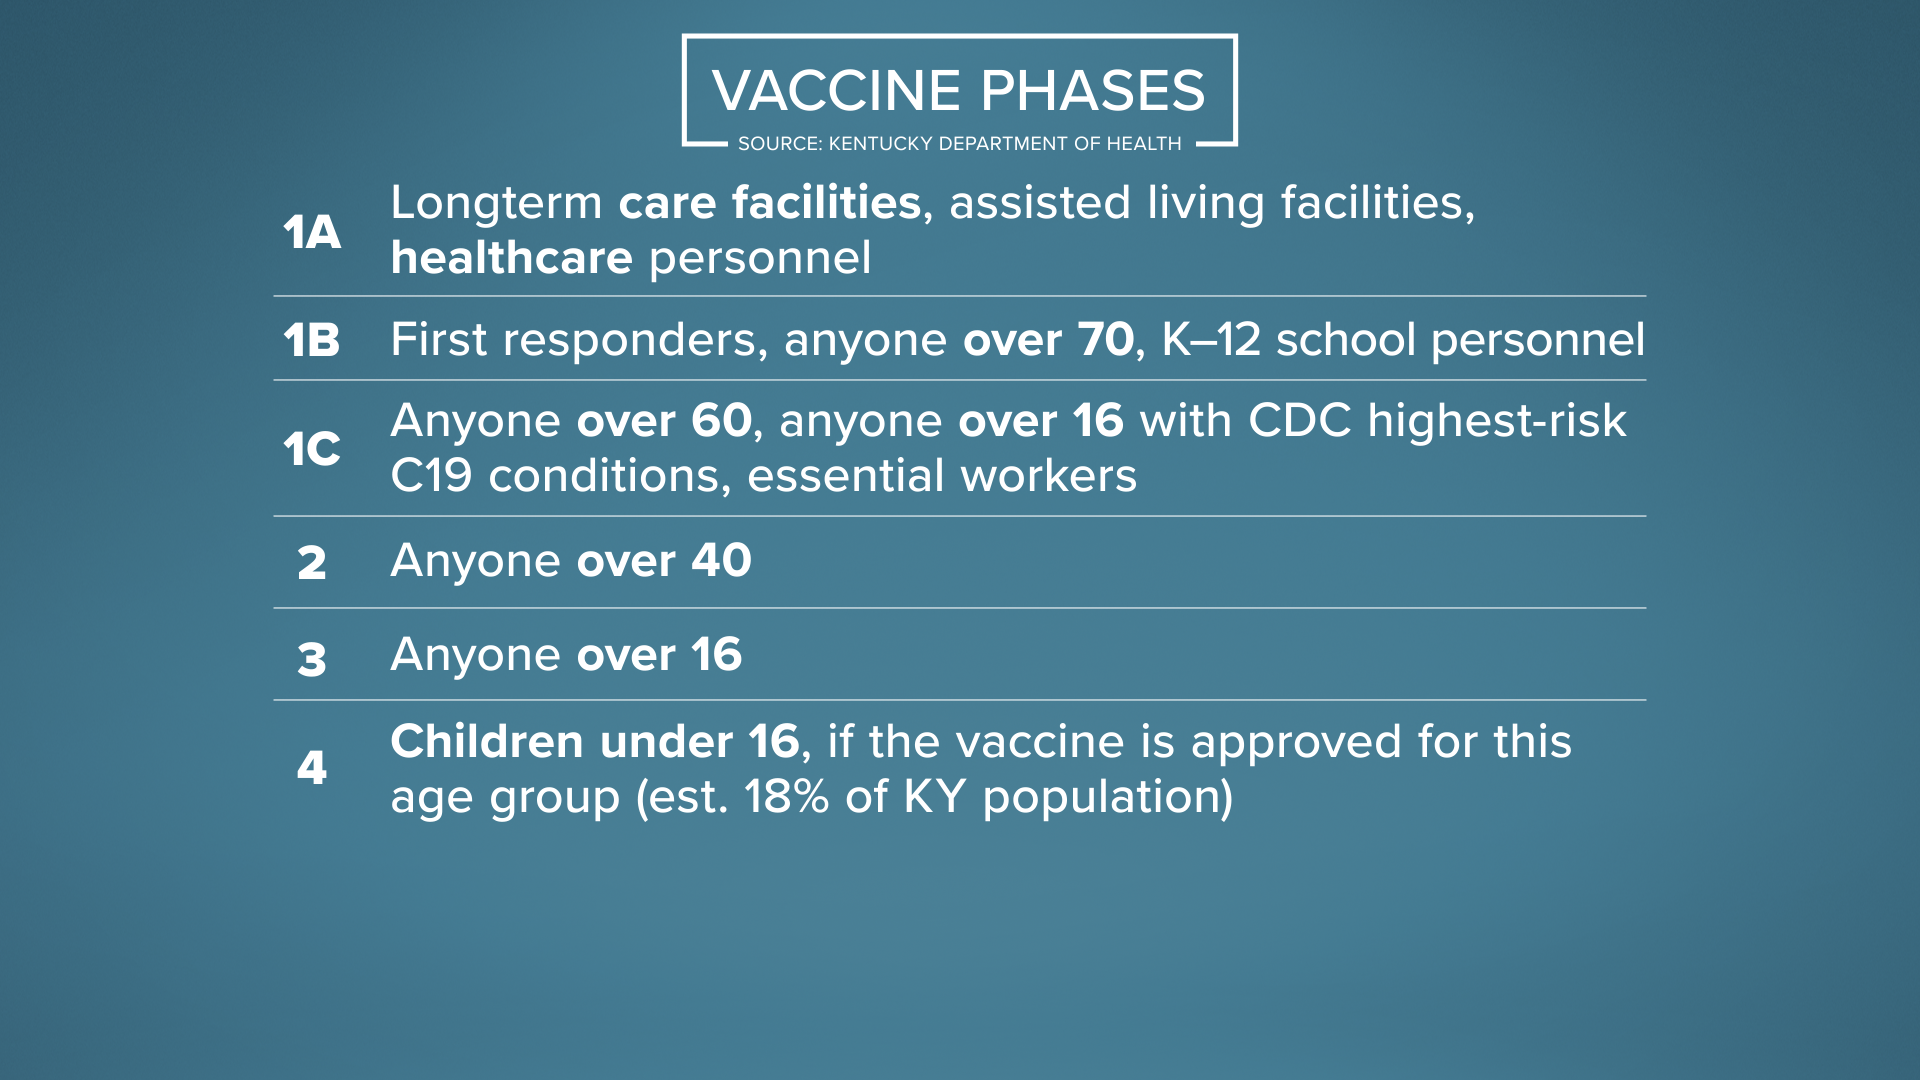 Gov. Andy Beshear updated Kentuckians on vaccination and contact tracing progress in the commonwealth.